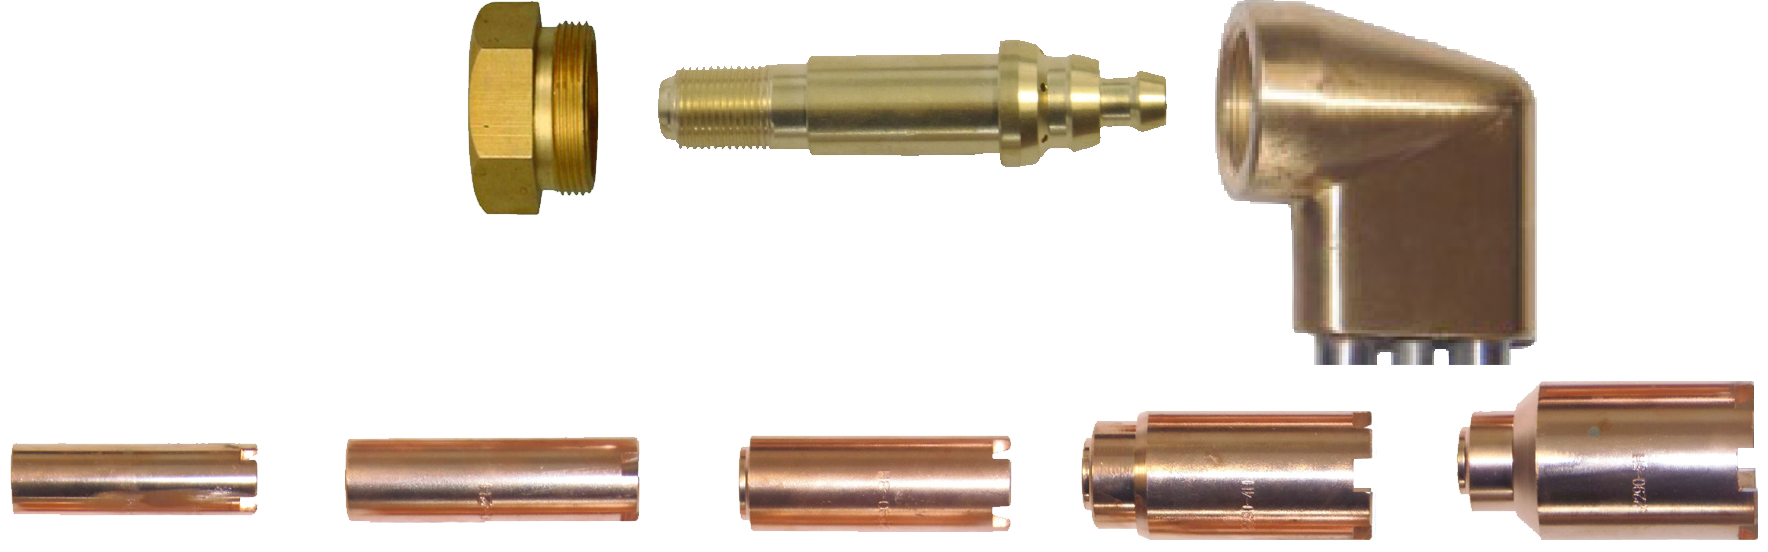 Super heating nozzles in sizes 1H, 2H, 3H, 4H and 5H